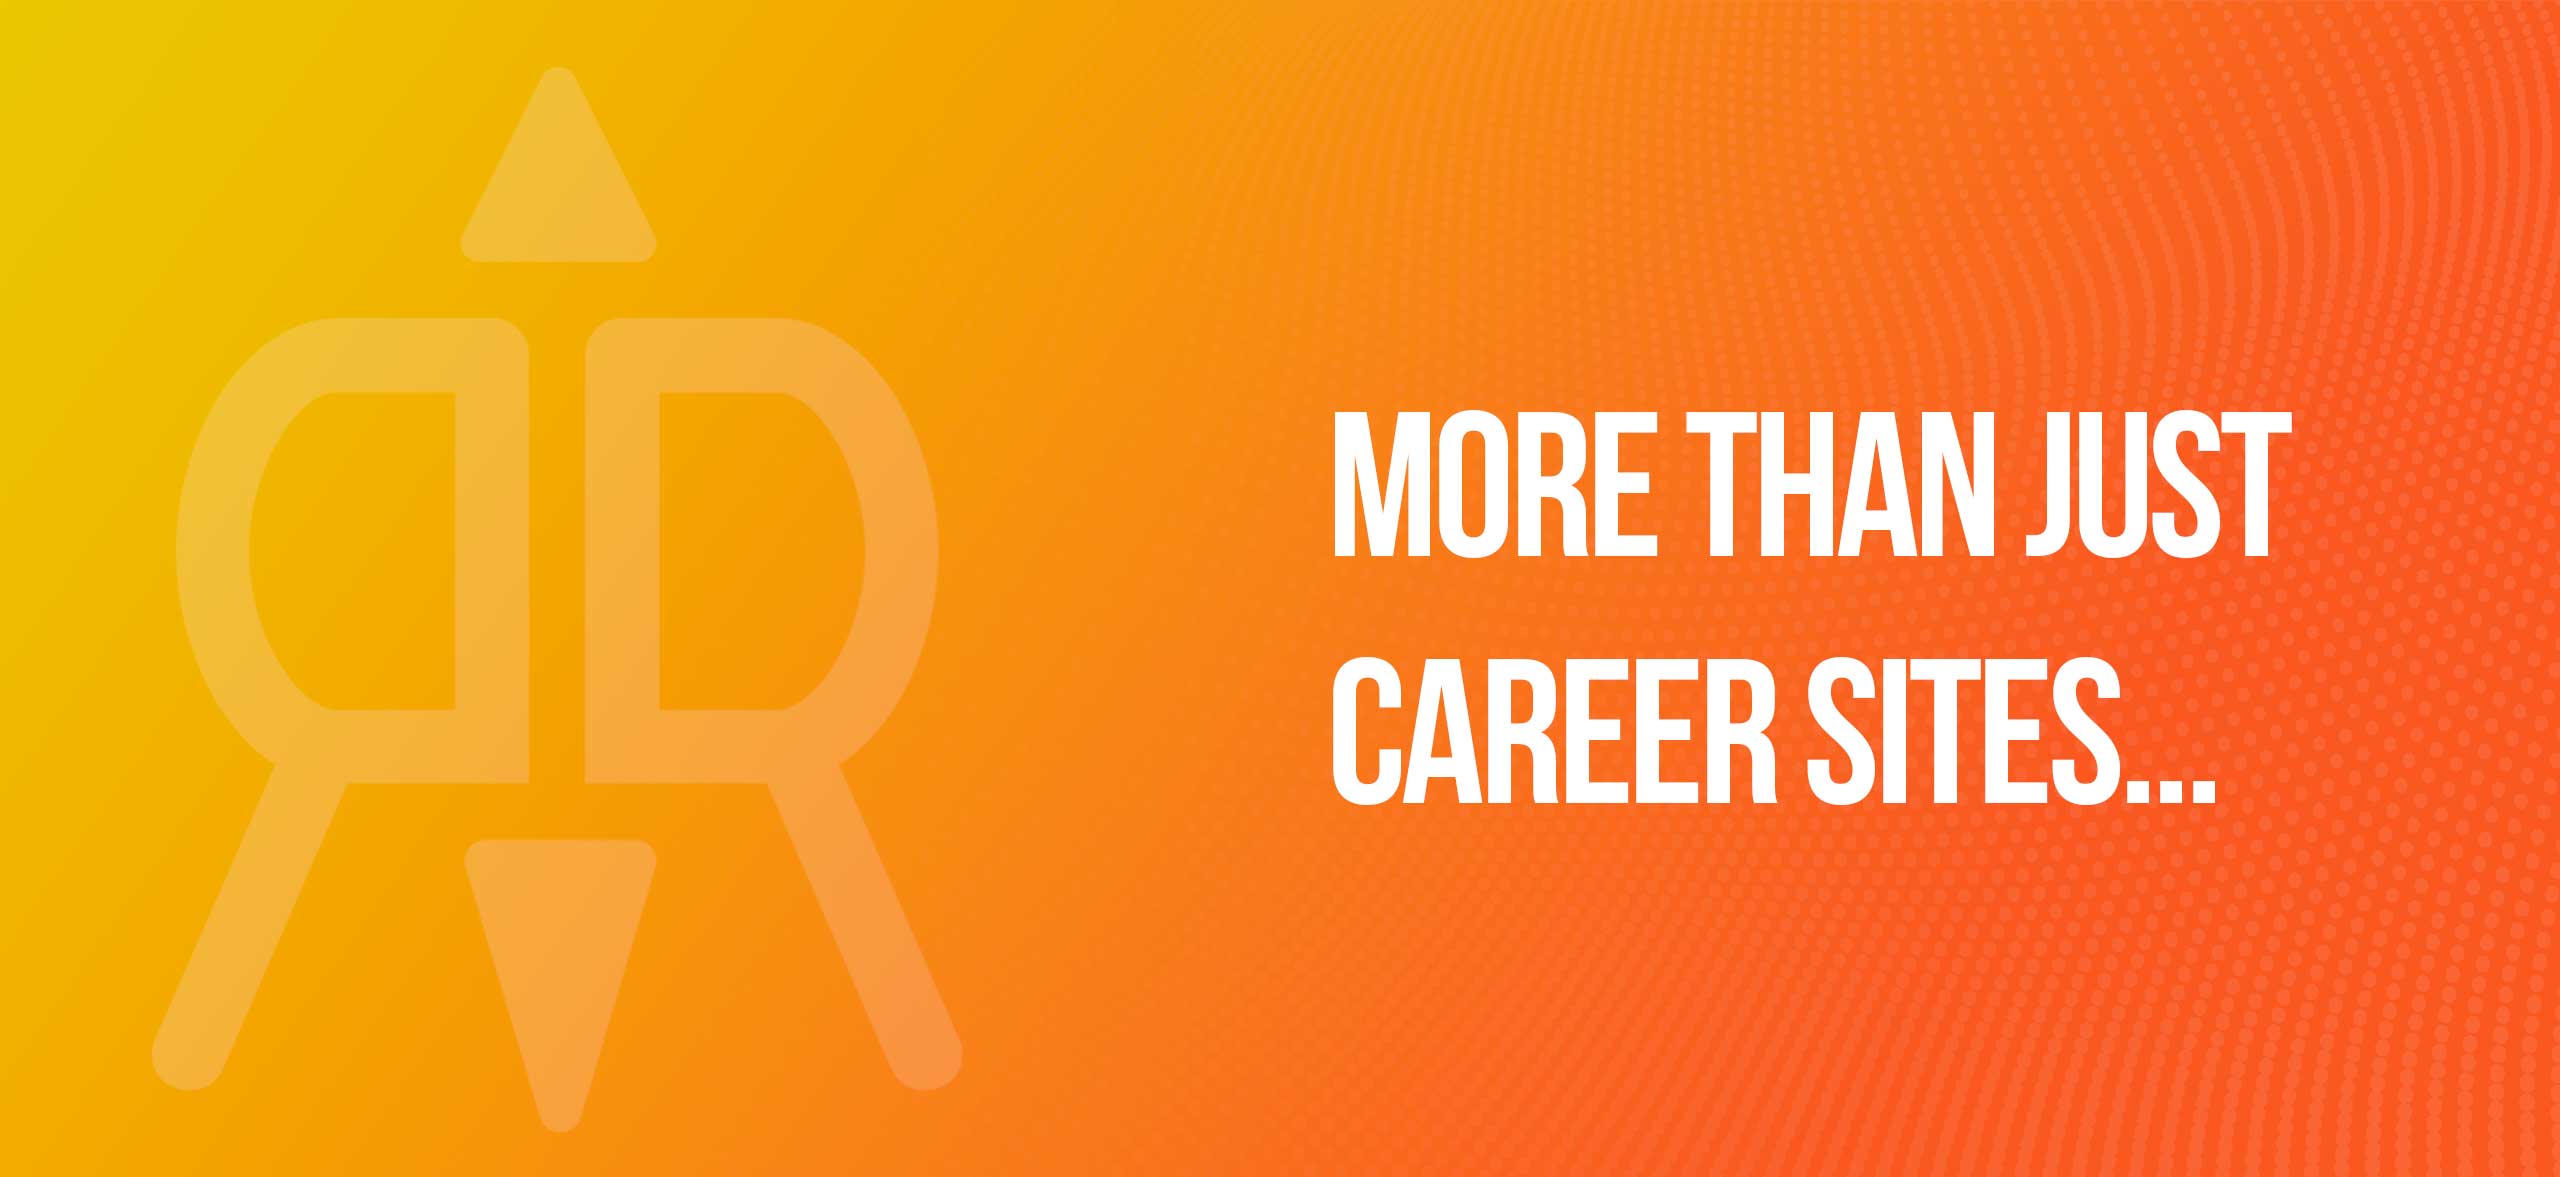 More Than Just Career Site